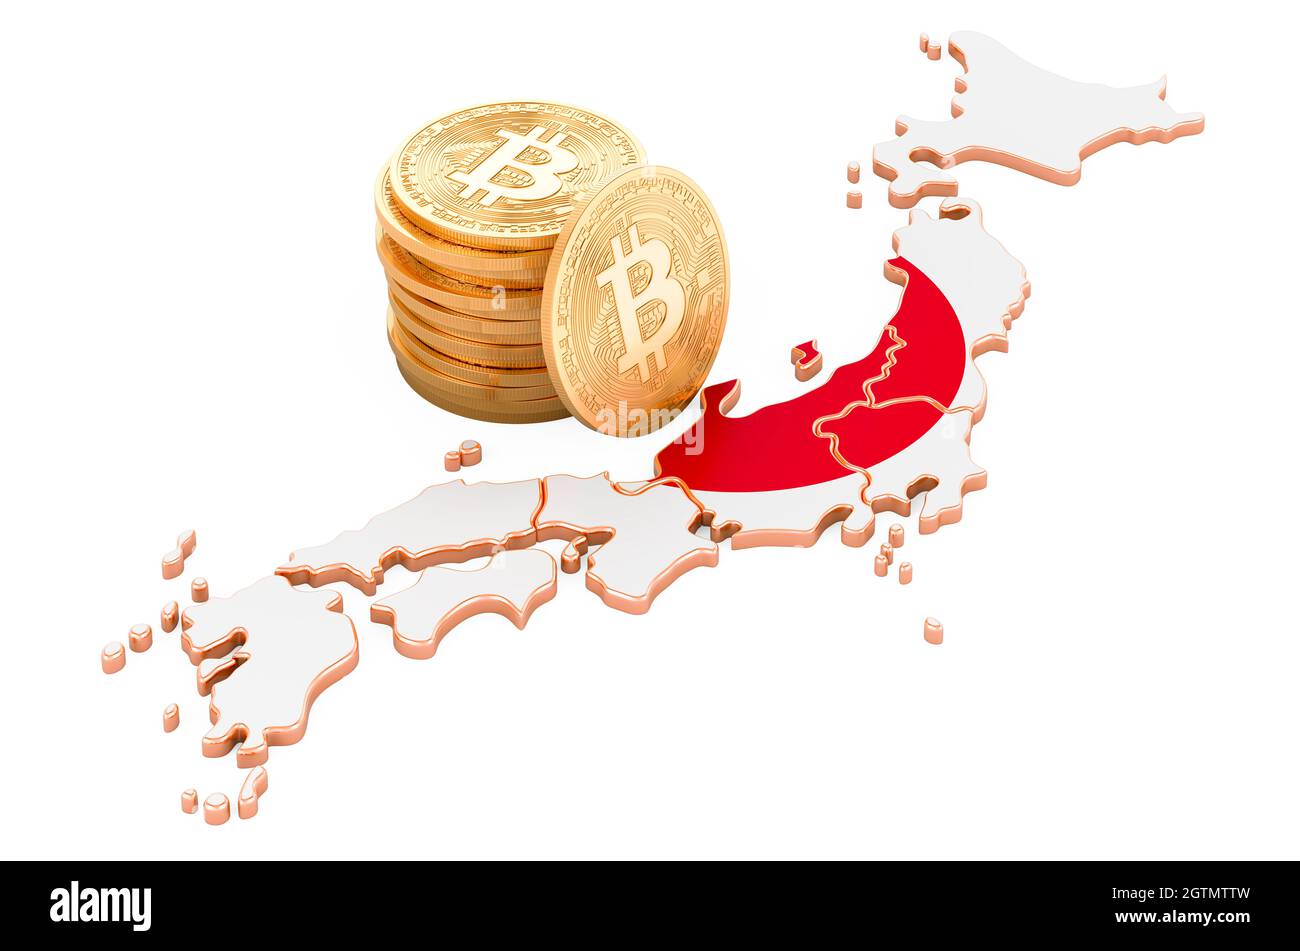 Bitcoin cryptocurrency in Japan, 3D rendering isolated on white background Stock Photo